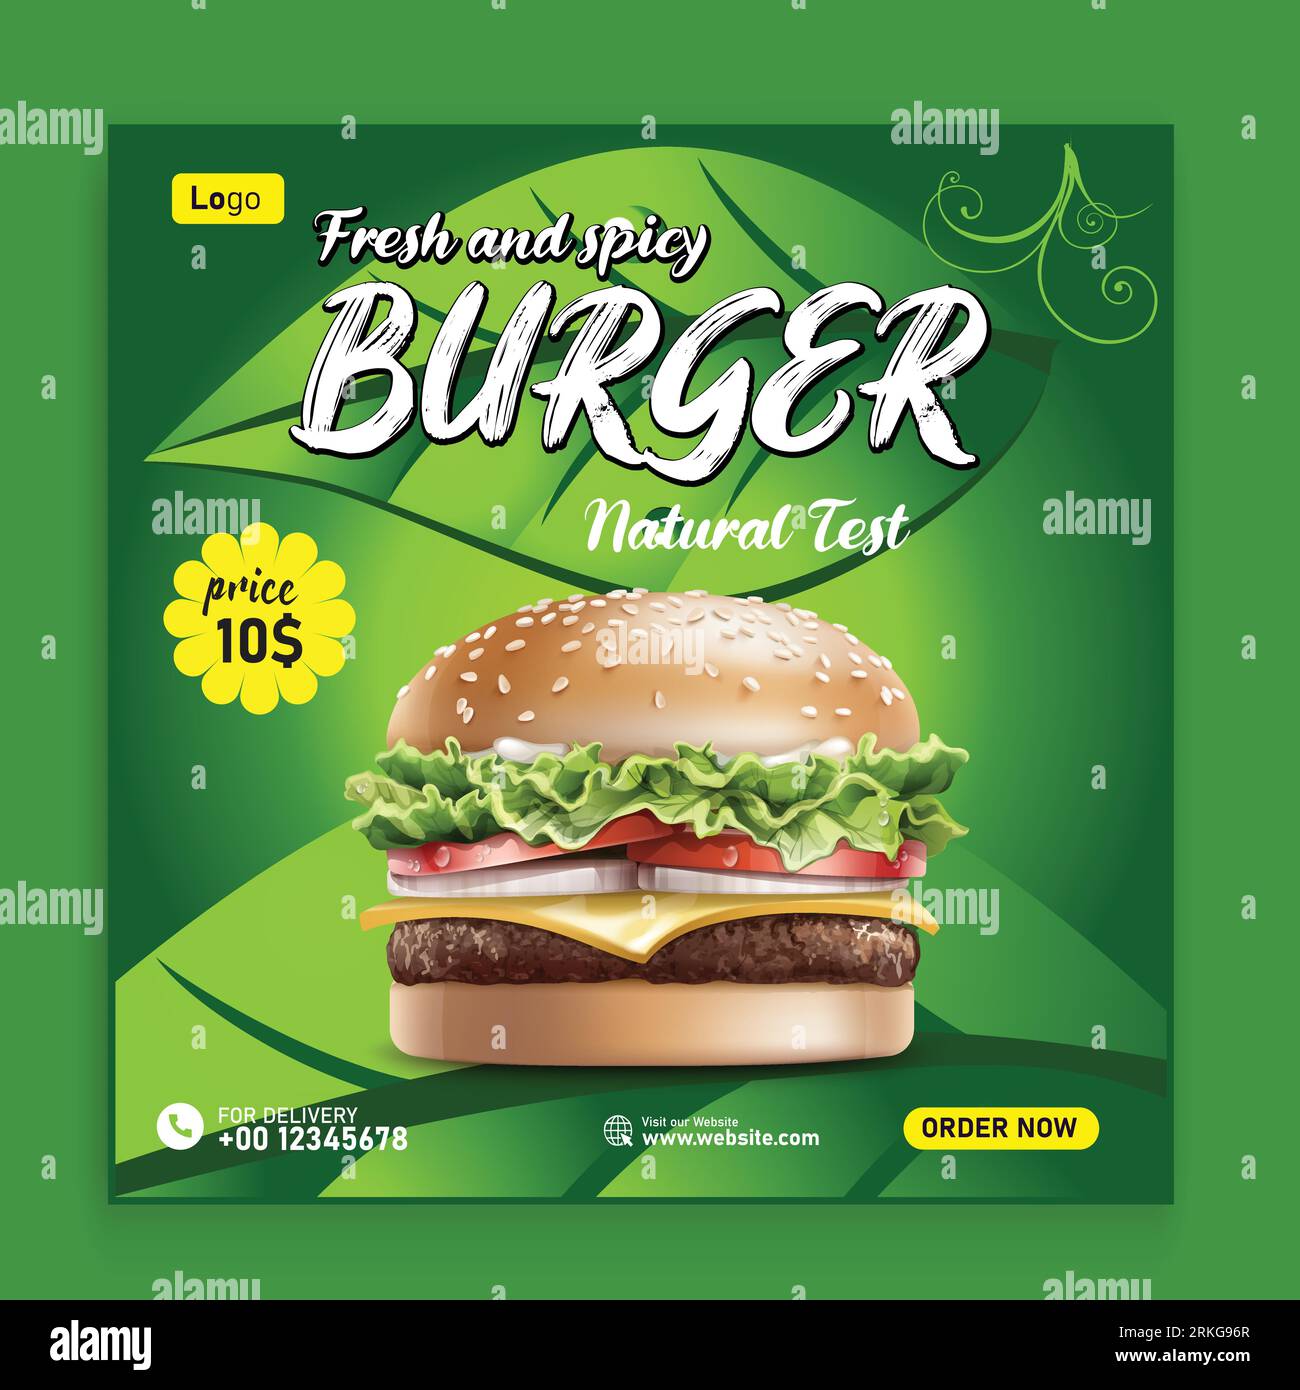 Burger fast food creative social media promotion and banner post design template Stock Vector